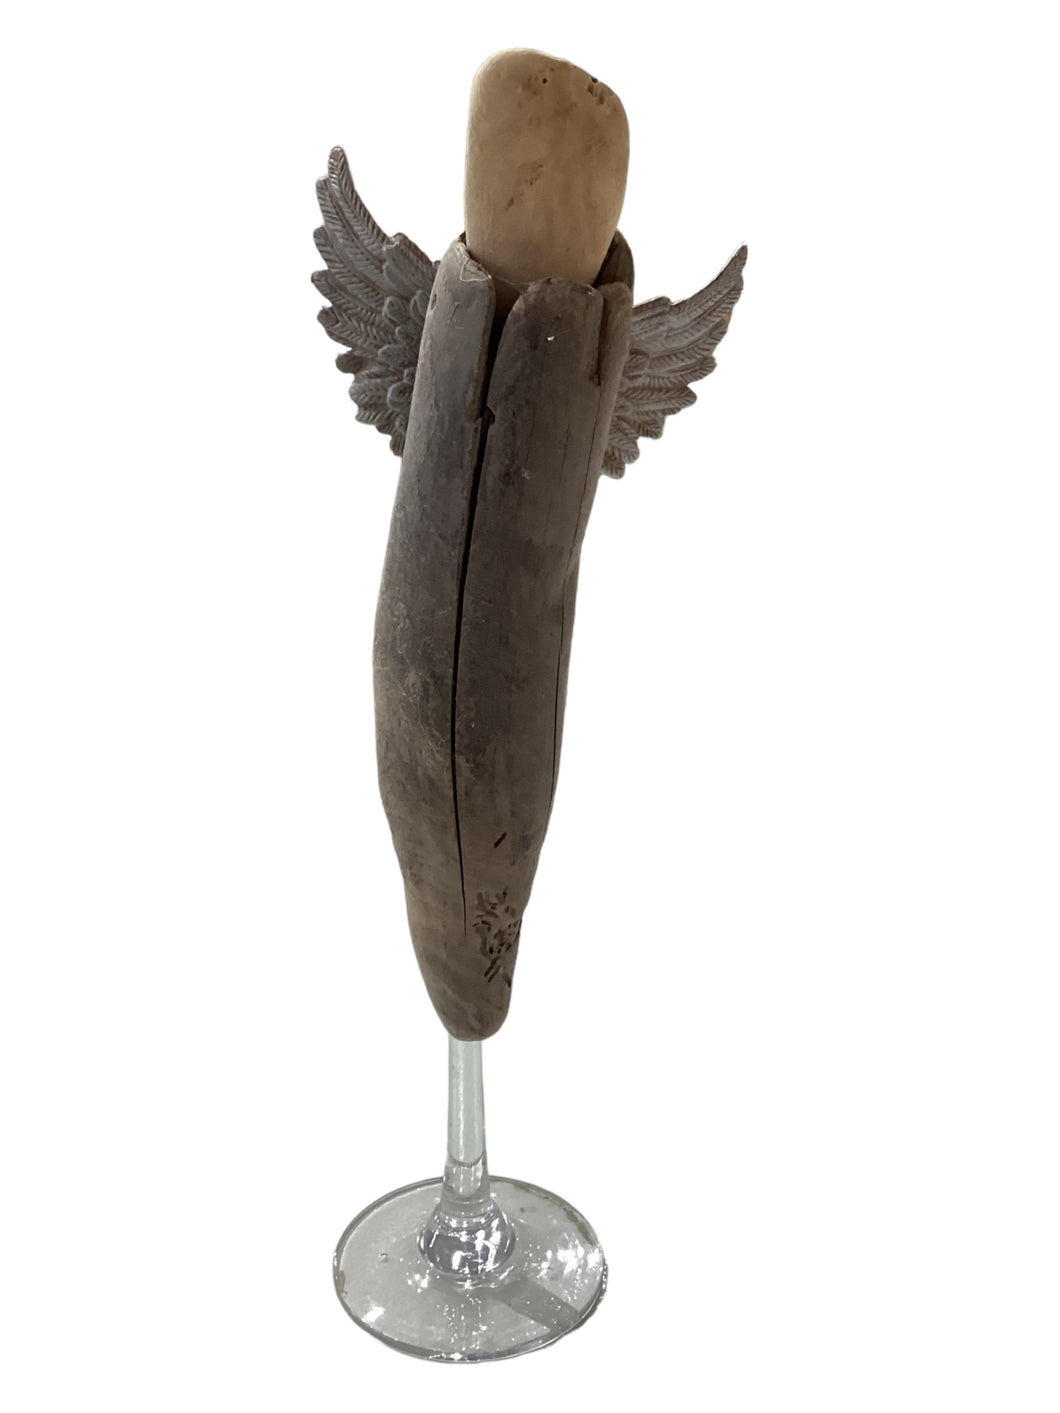 Driftwood Angel Sculpture on Champagne Glass Stand